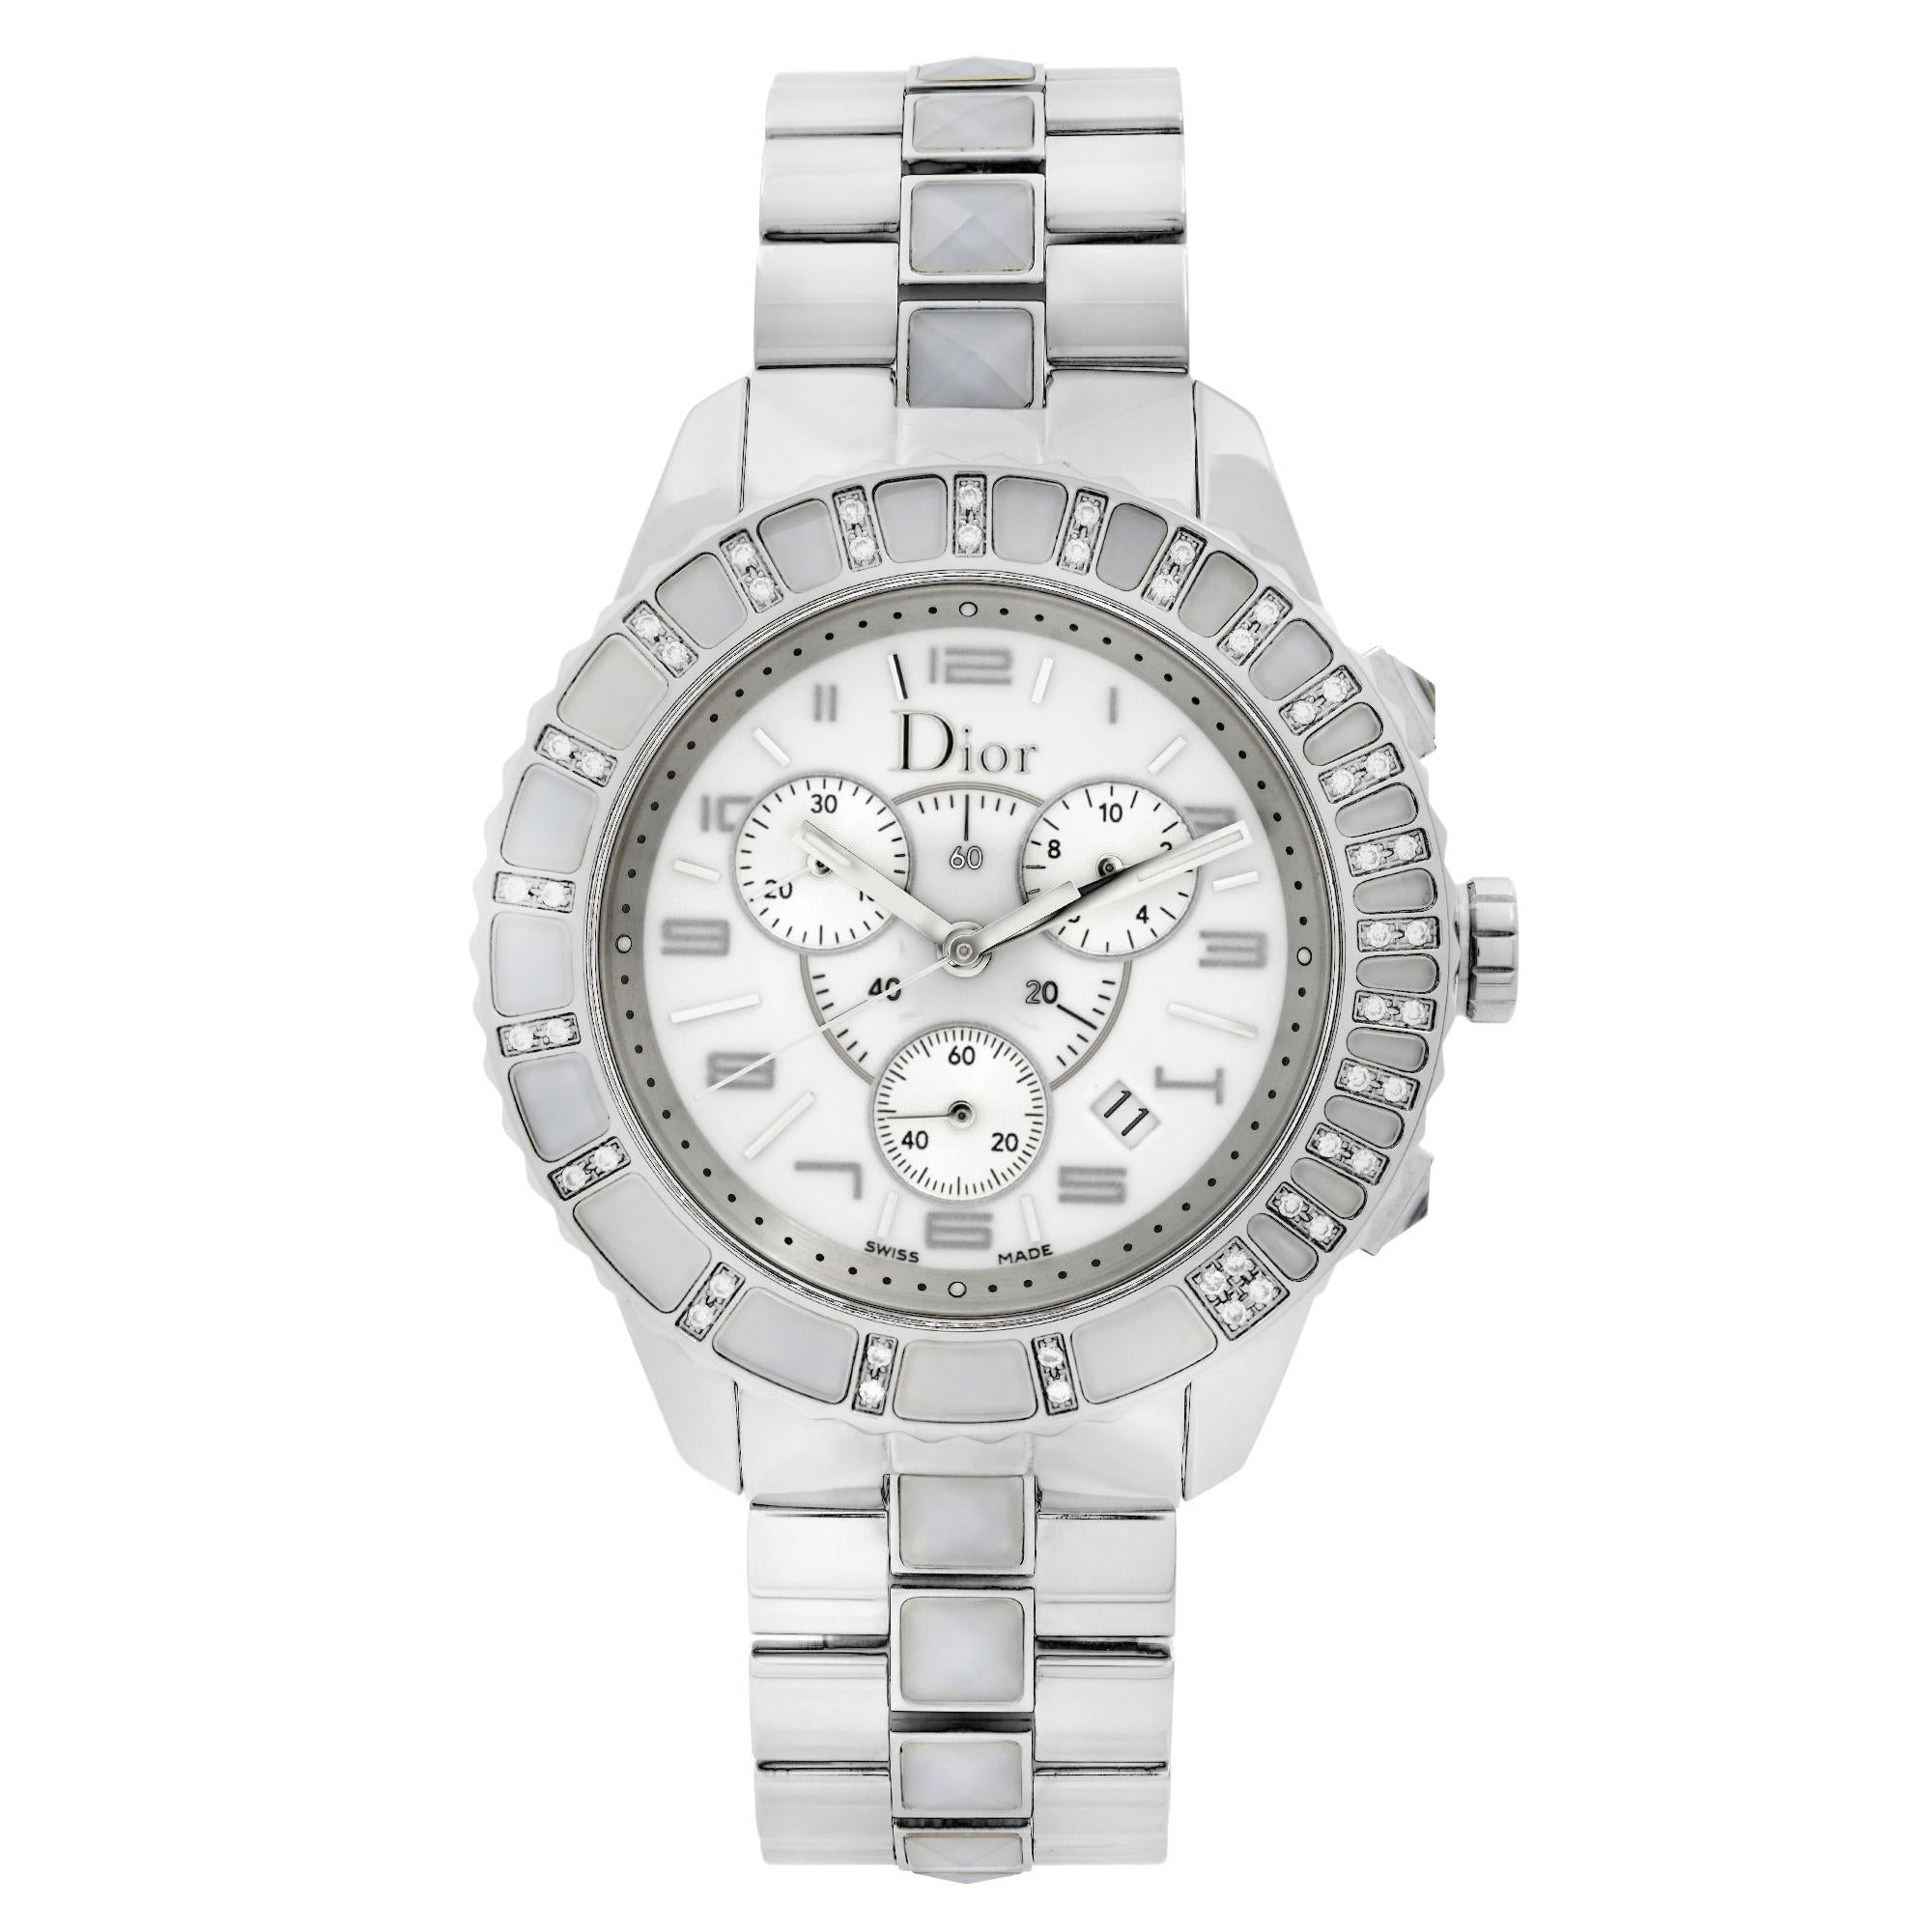 Dior Christal Stainless Steel Diamond White Dial Quartz Watch CD114311M001 For Sale